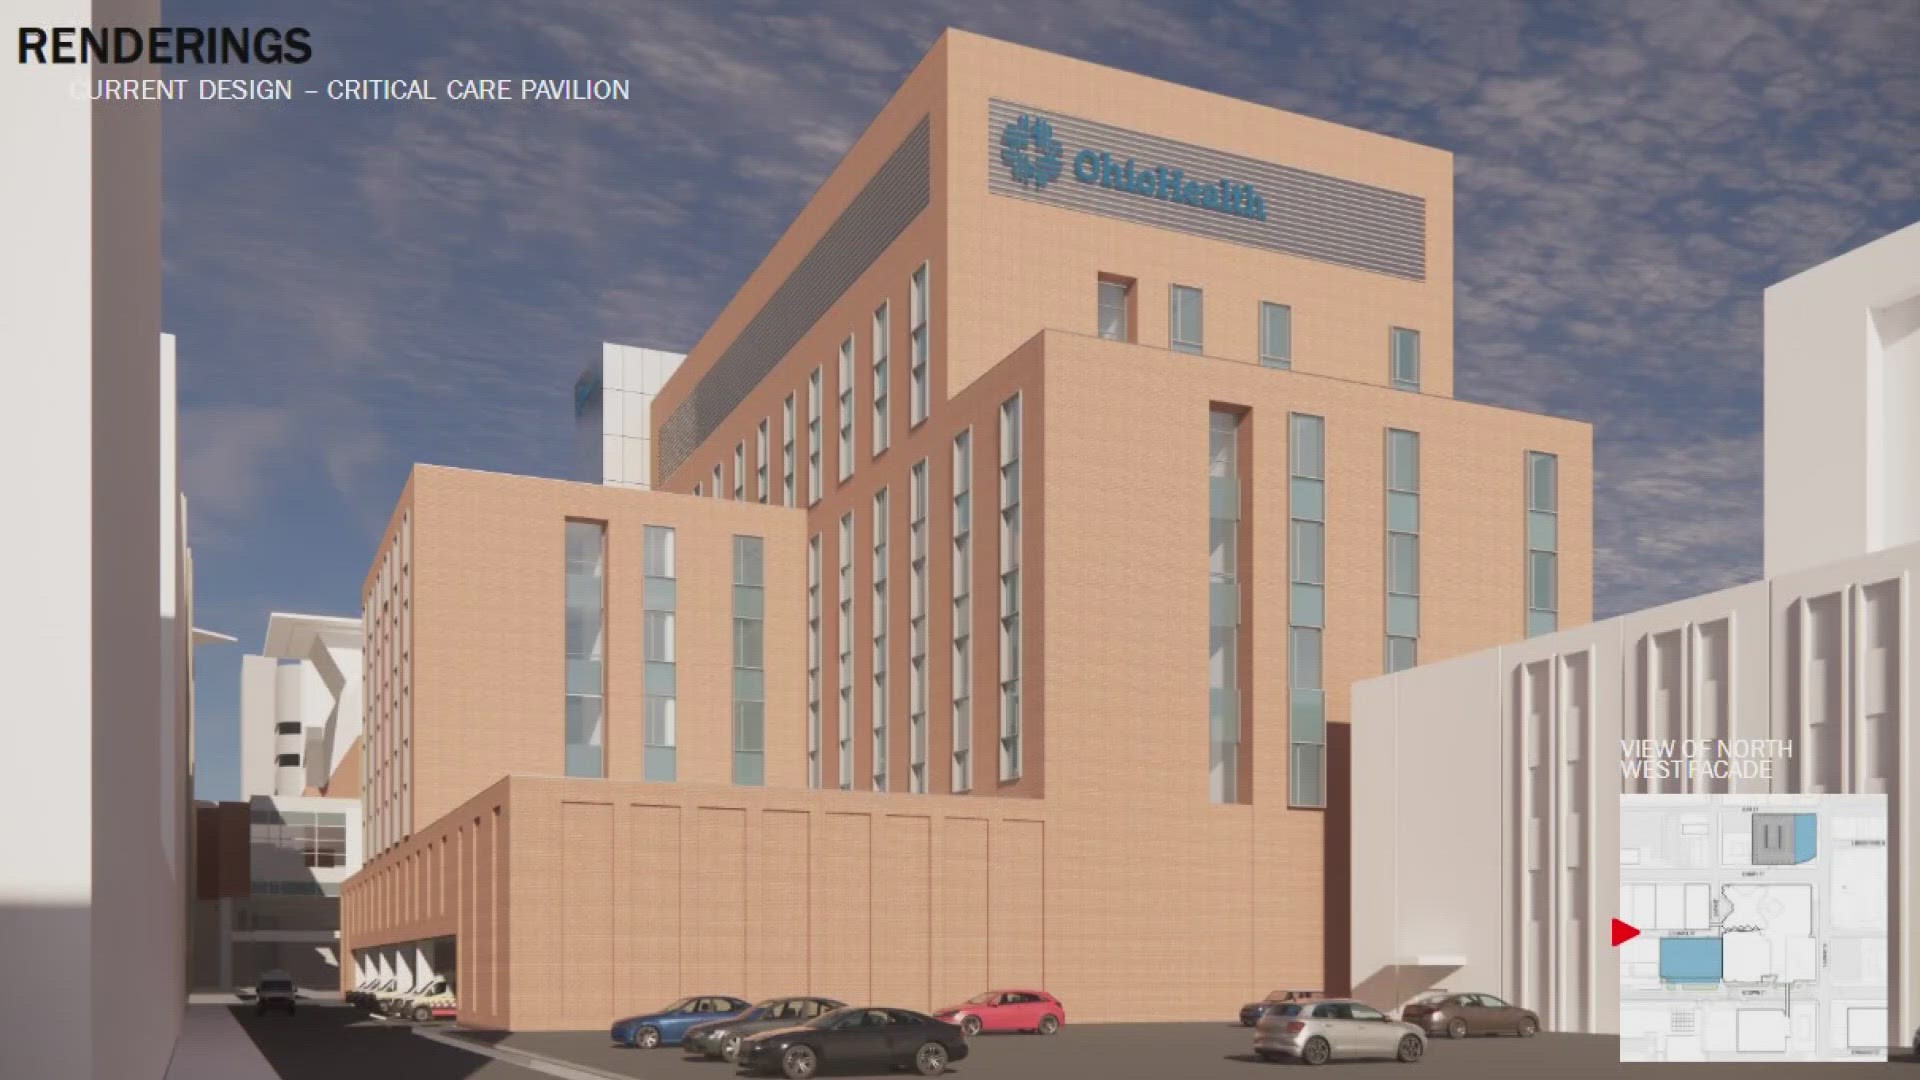 The hospital says it plans to break ground in September to start construction on its new medical office building with a completion date in 2025.